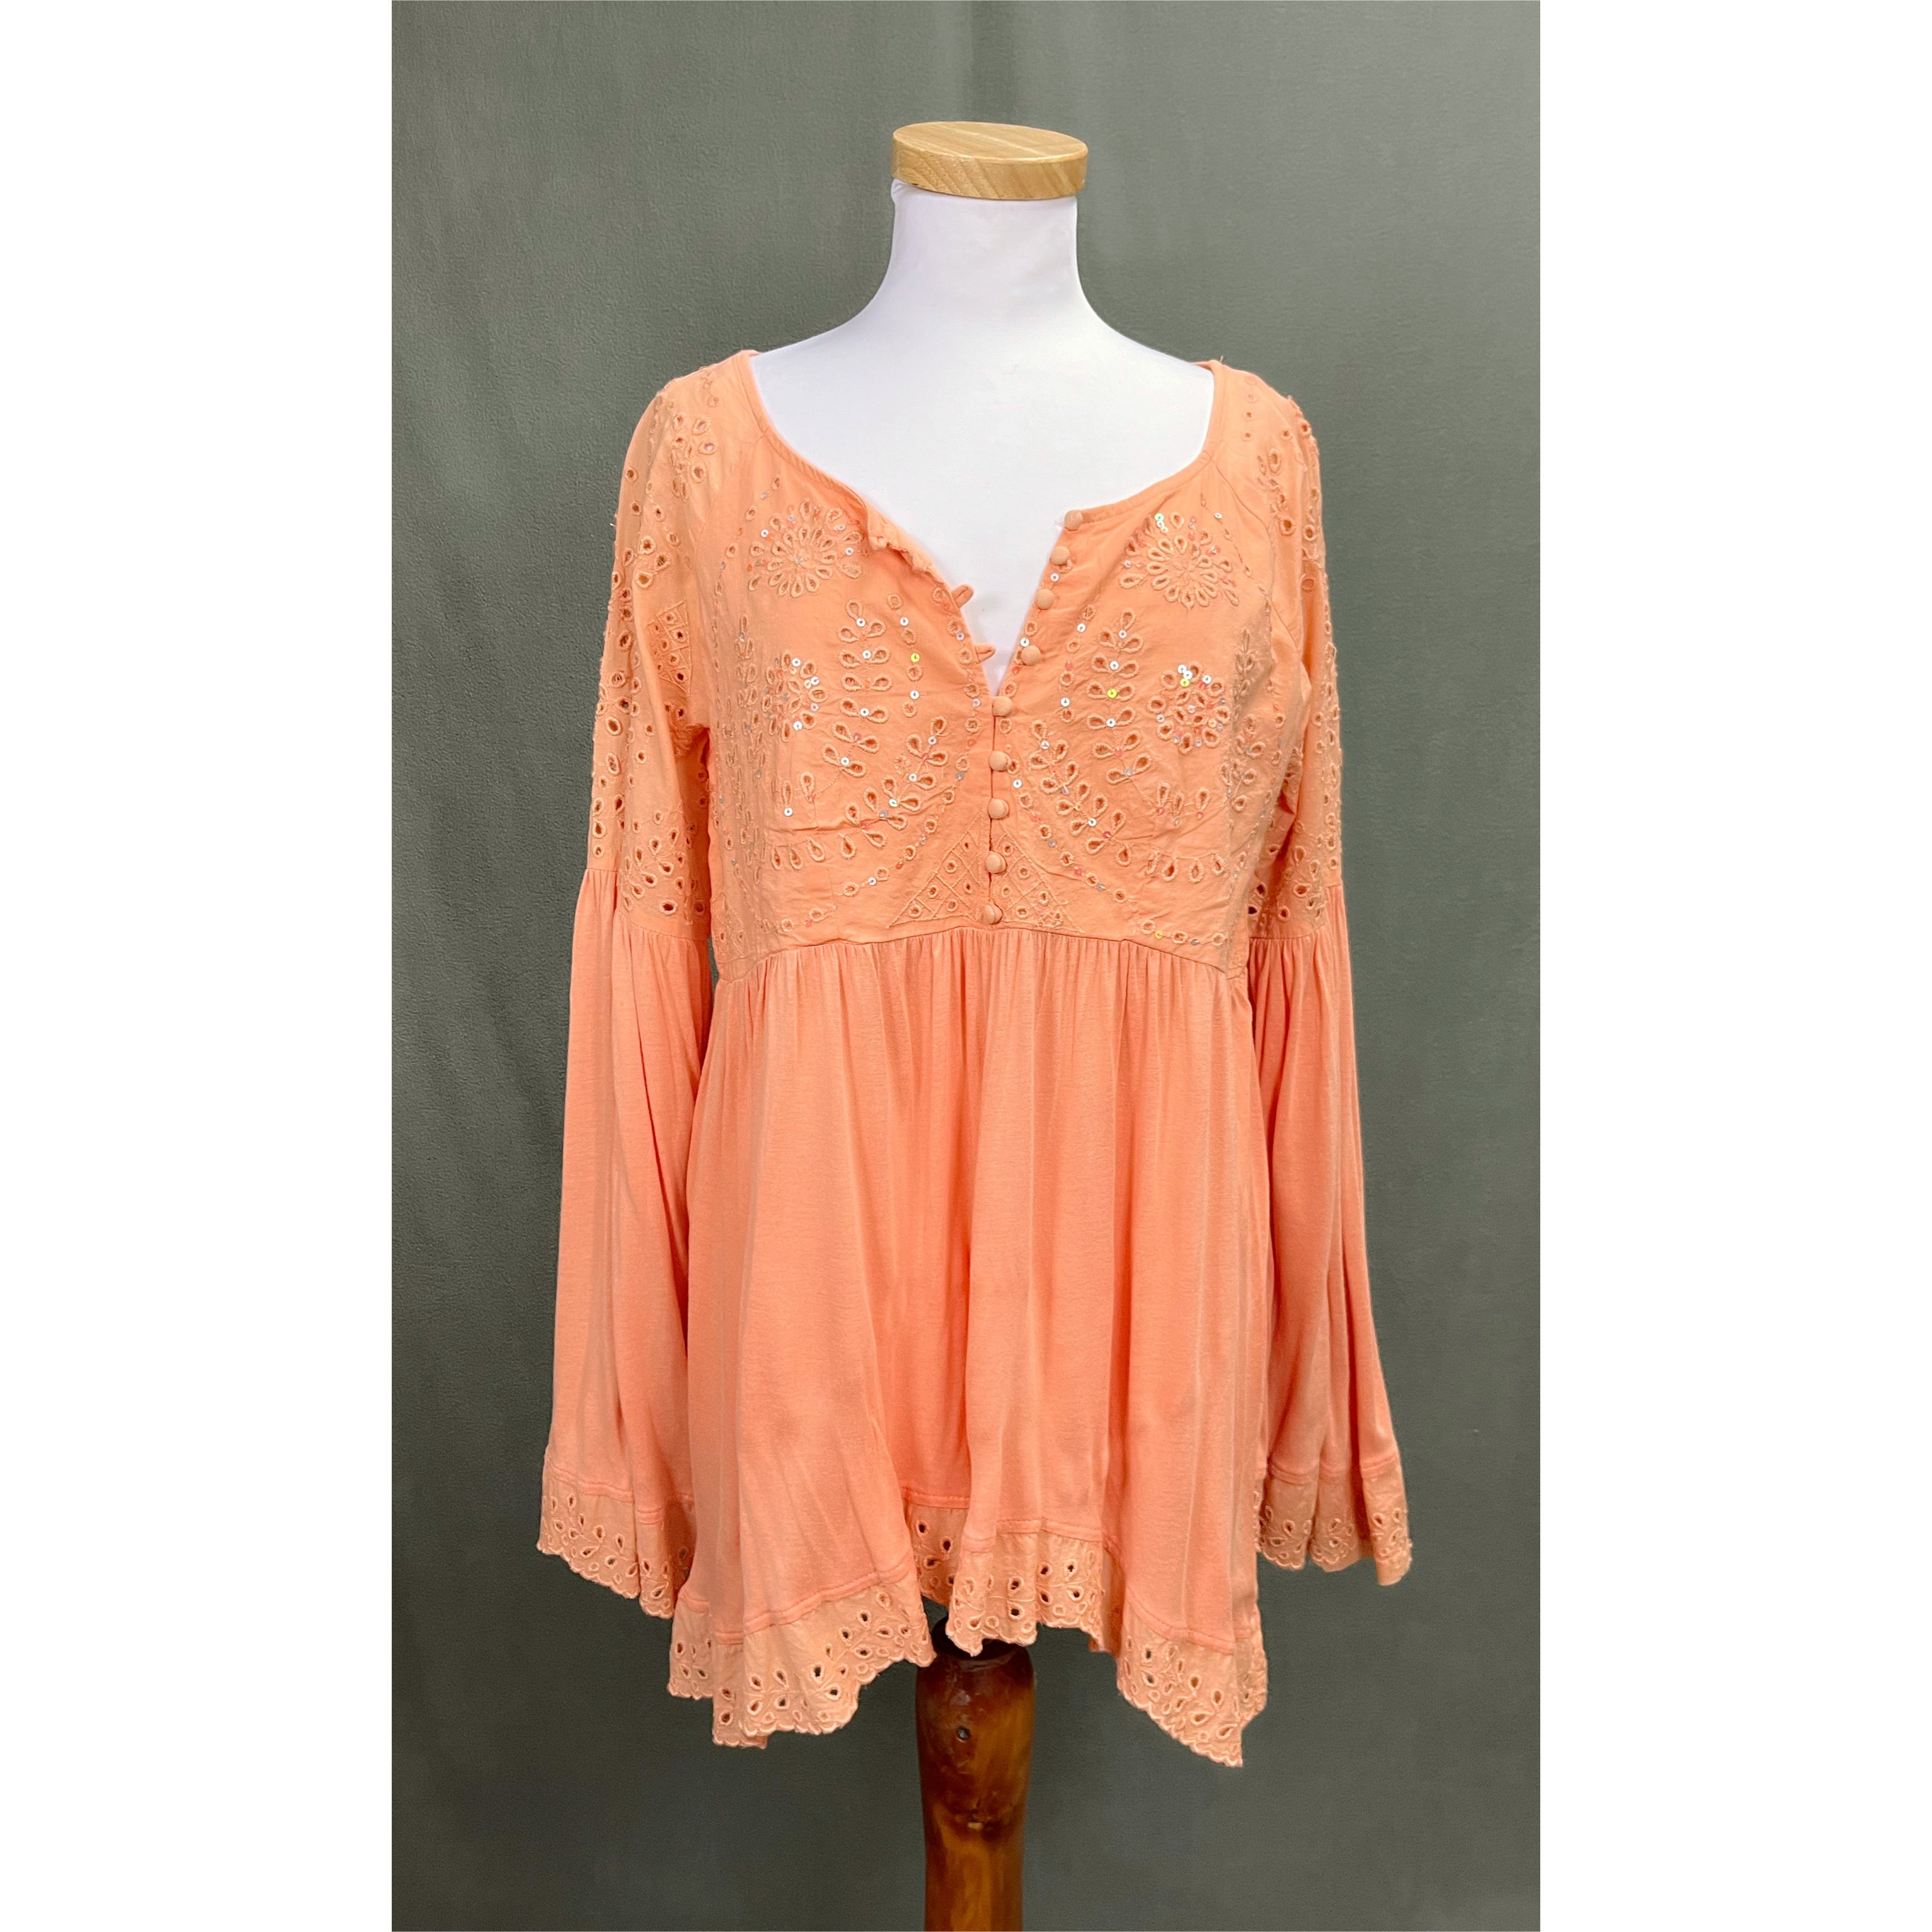 Johnny Was peach blouse, size M, NEW WITH TAGS!